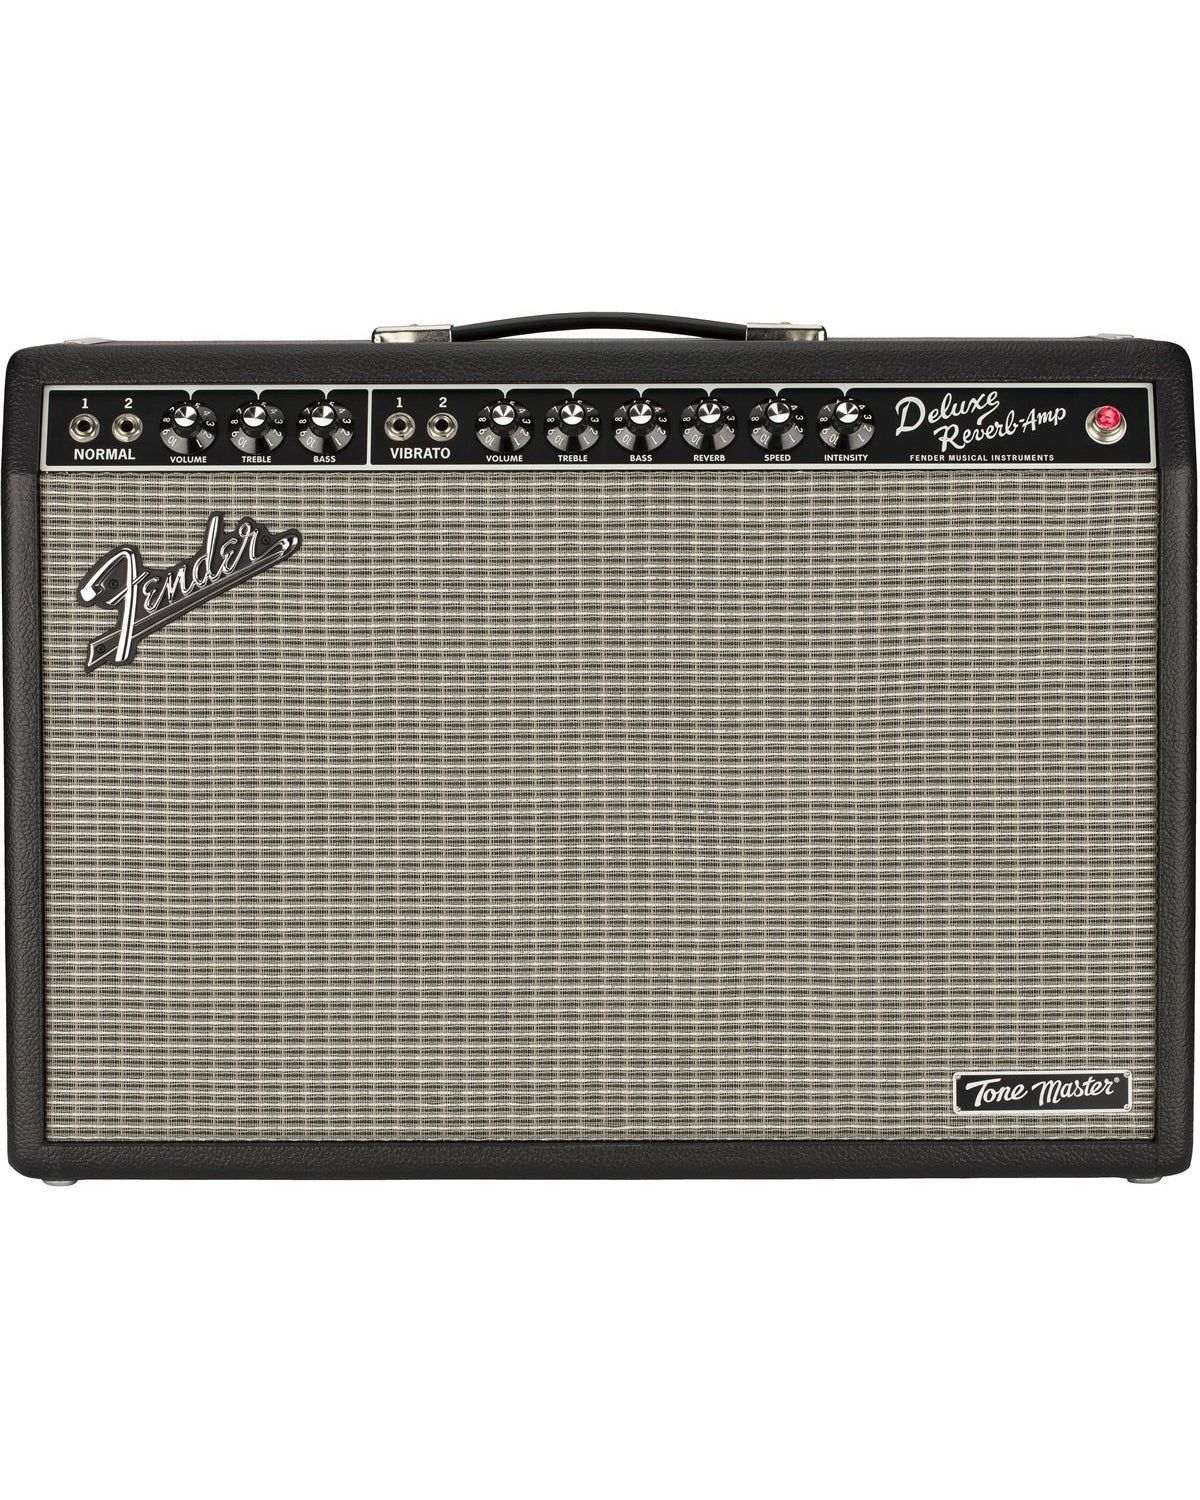 Front of Fender Tone Master Deluxe Reverb